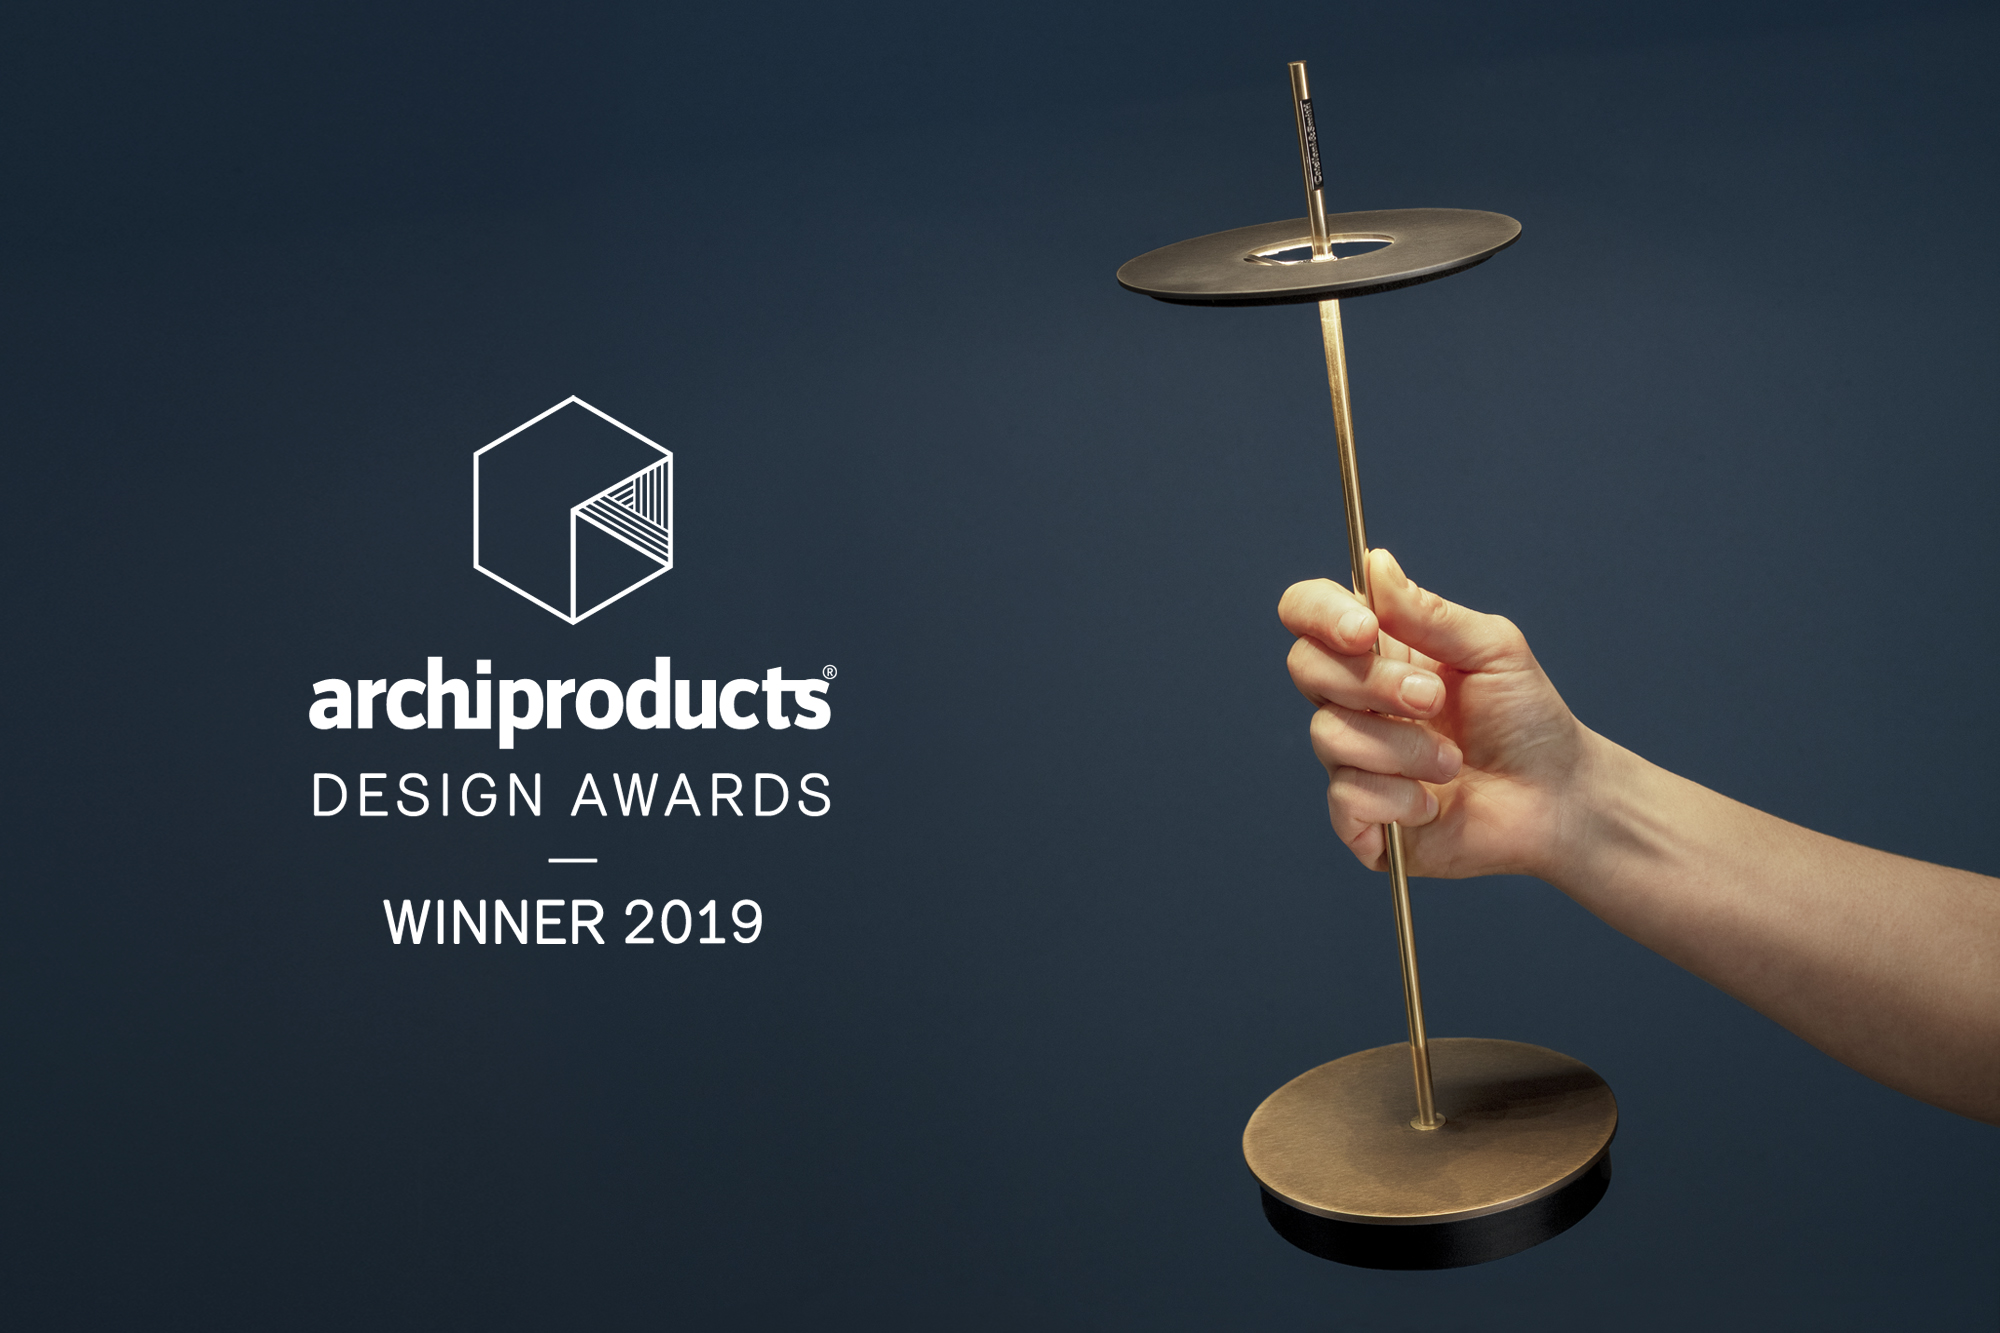 Archiproducts Design Awards 2019